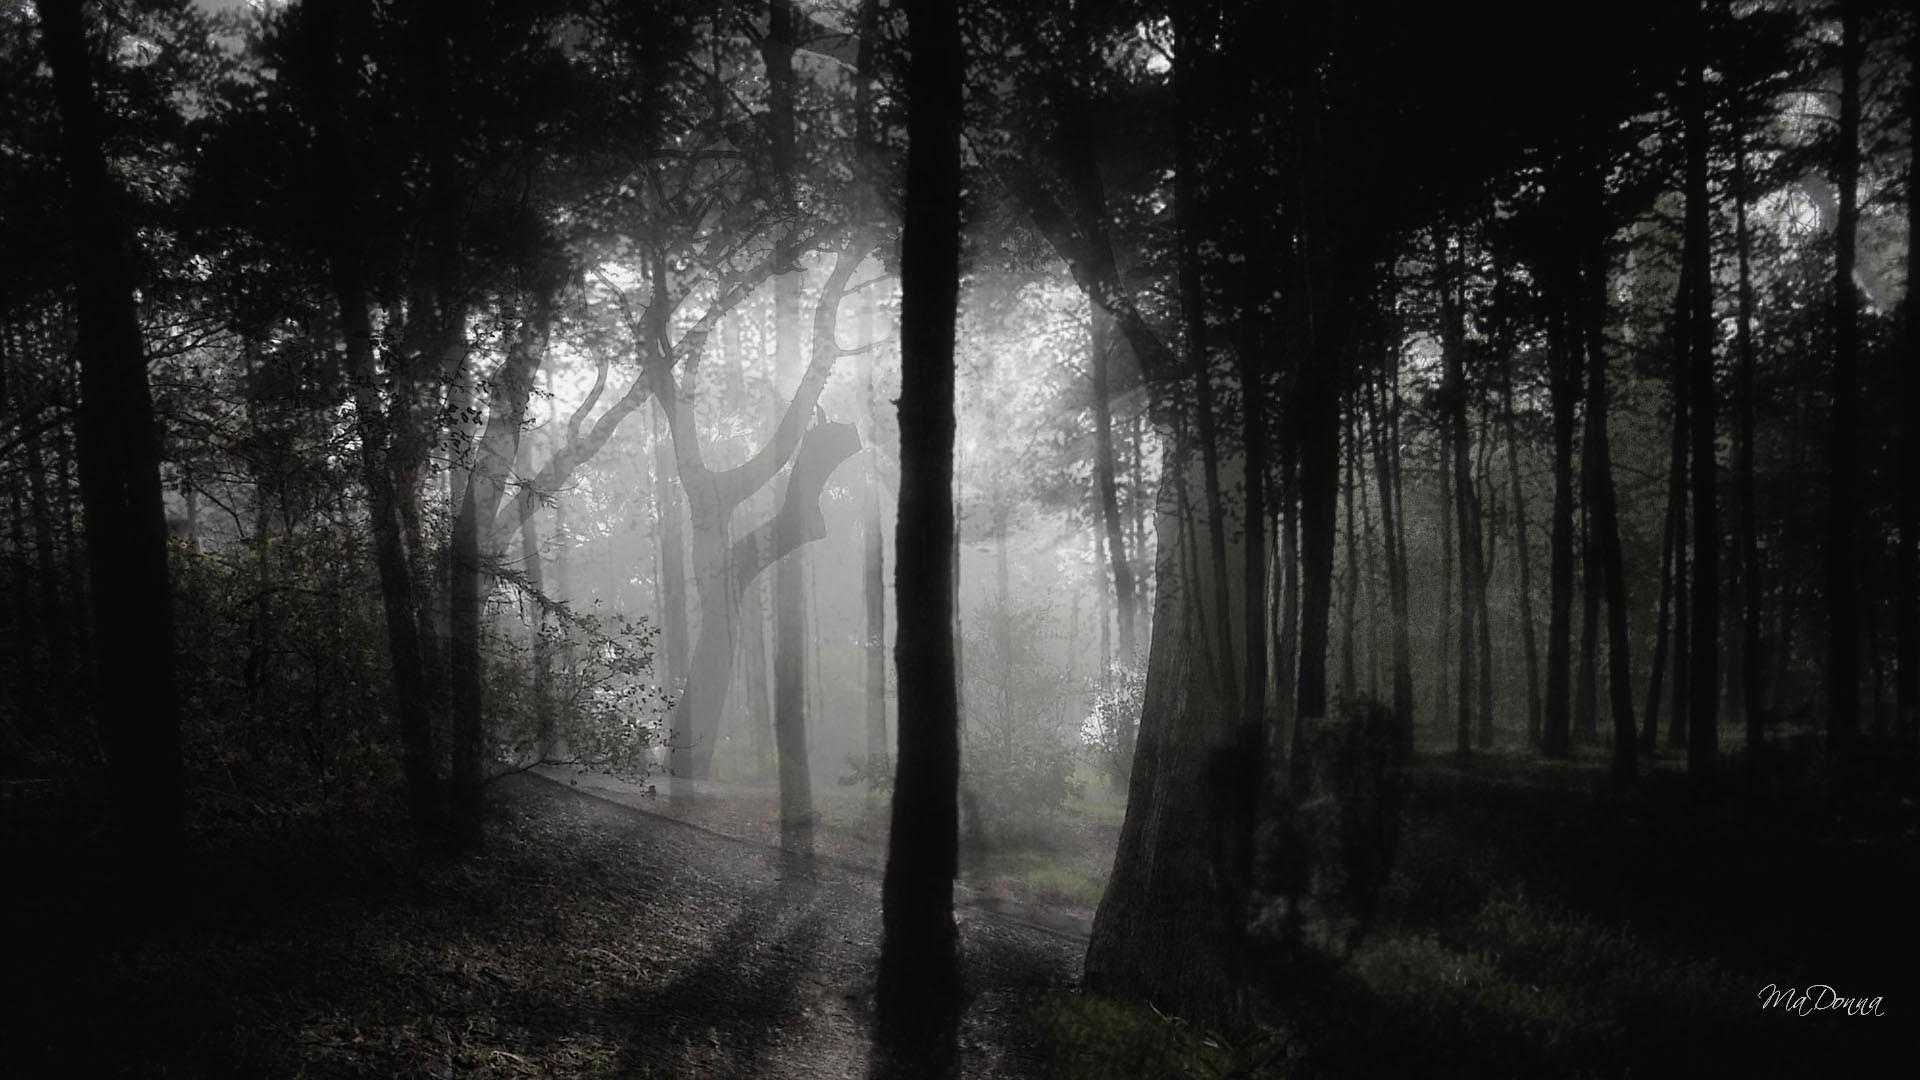 Gothic Images In The Woods (#303212) - HD Wallpaper & Backgrounds Download